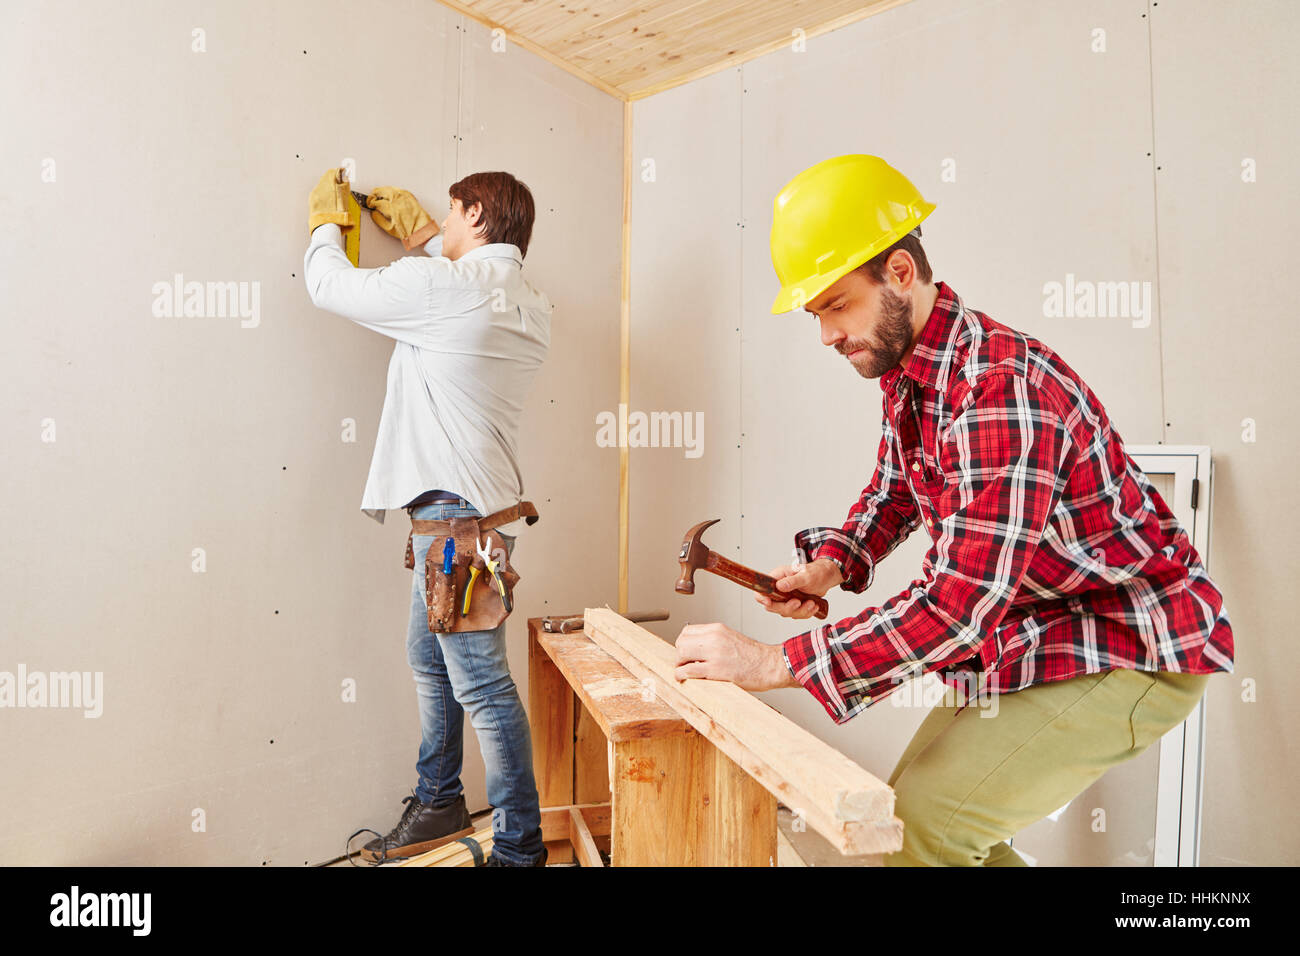 House renovation with craftsman and artisan working Stock Photo